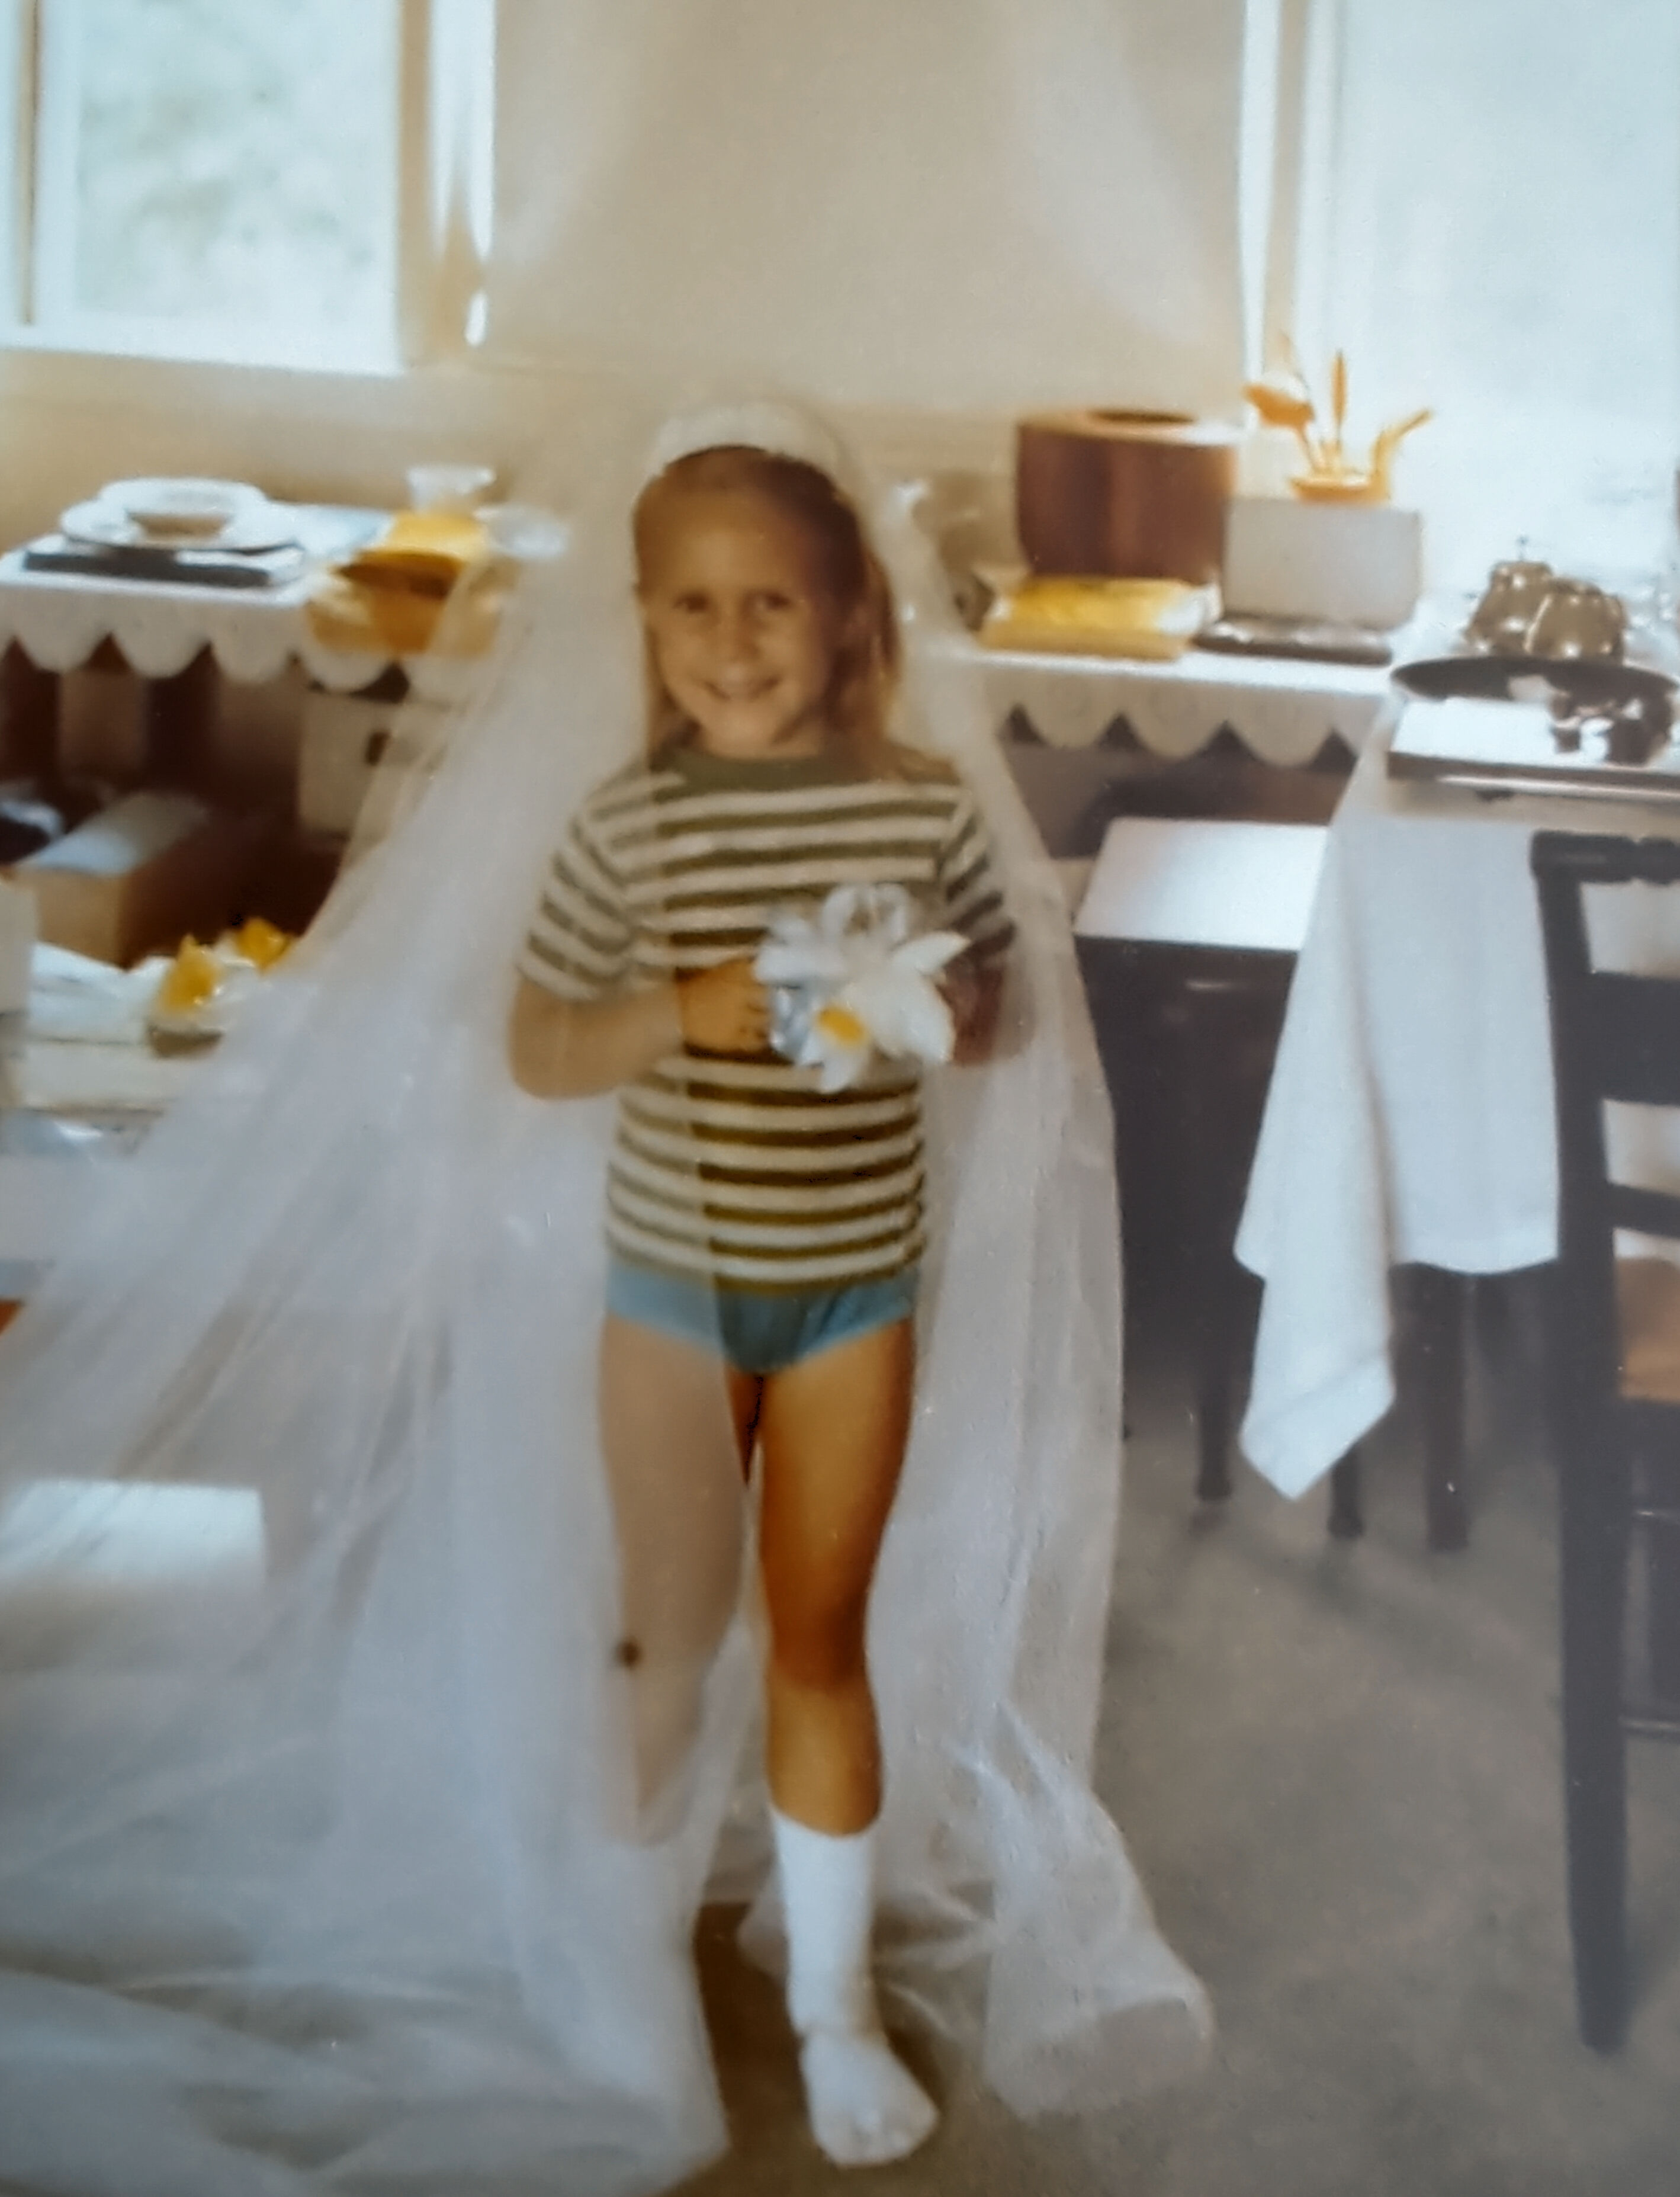 Adrianne trying on lizbes' wedding veil august 1978